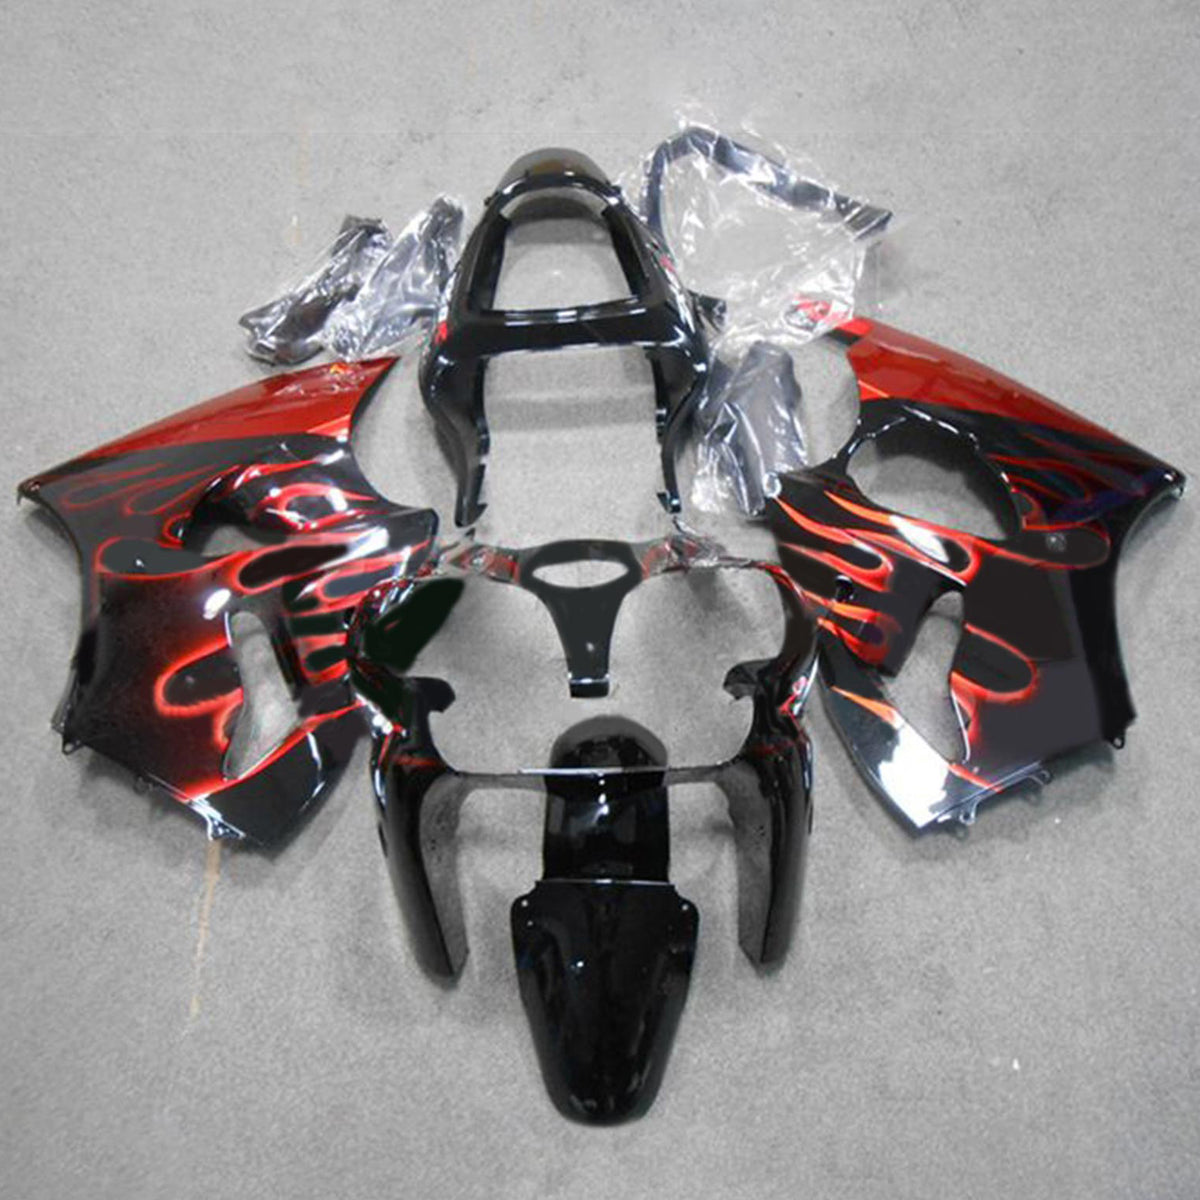 Amotopart ZX6R 636 2000-2002 ZZR600 2005-2008 Kawasaki Black with Red Flame Fairing Kit